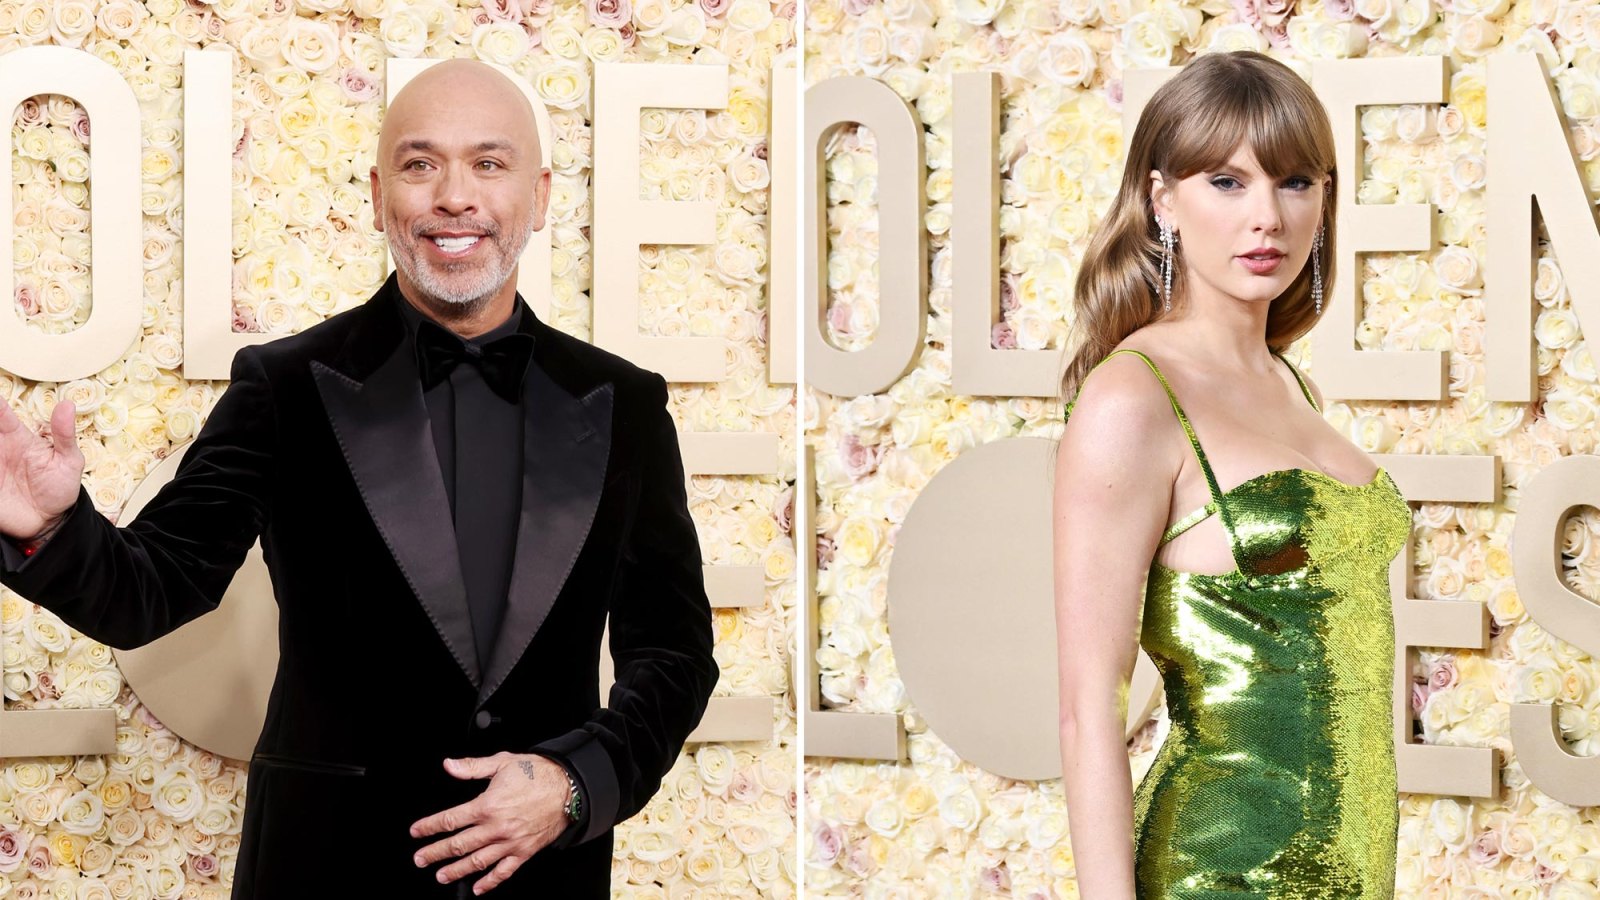 Jo Koys Quotes About His Viral Golden Globes Joke About Taylor Swift It Was a Compliment